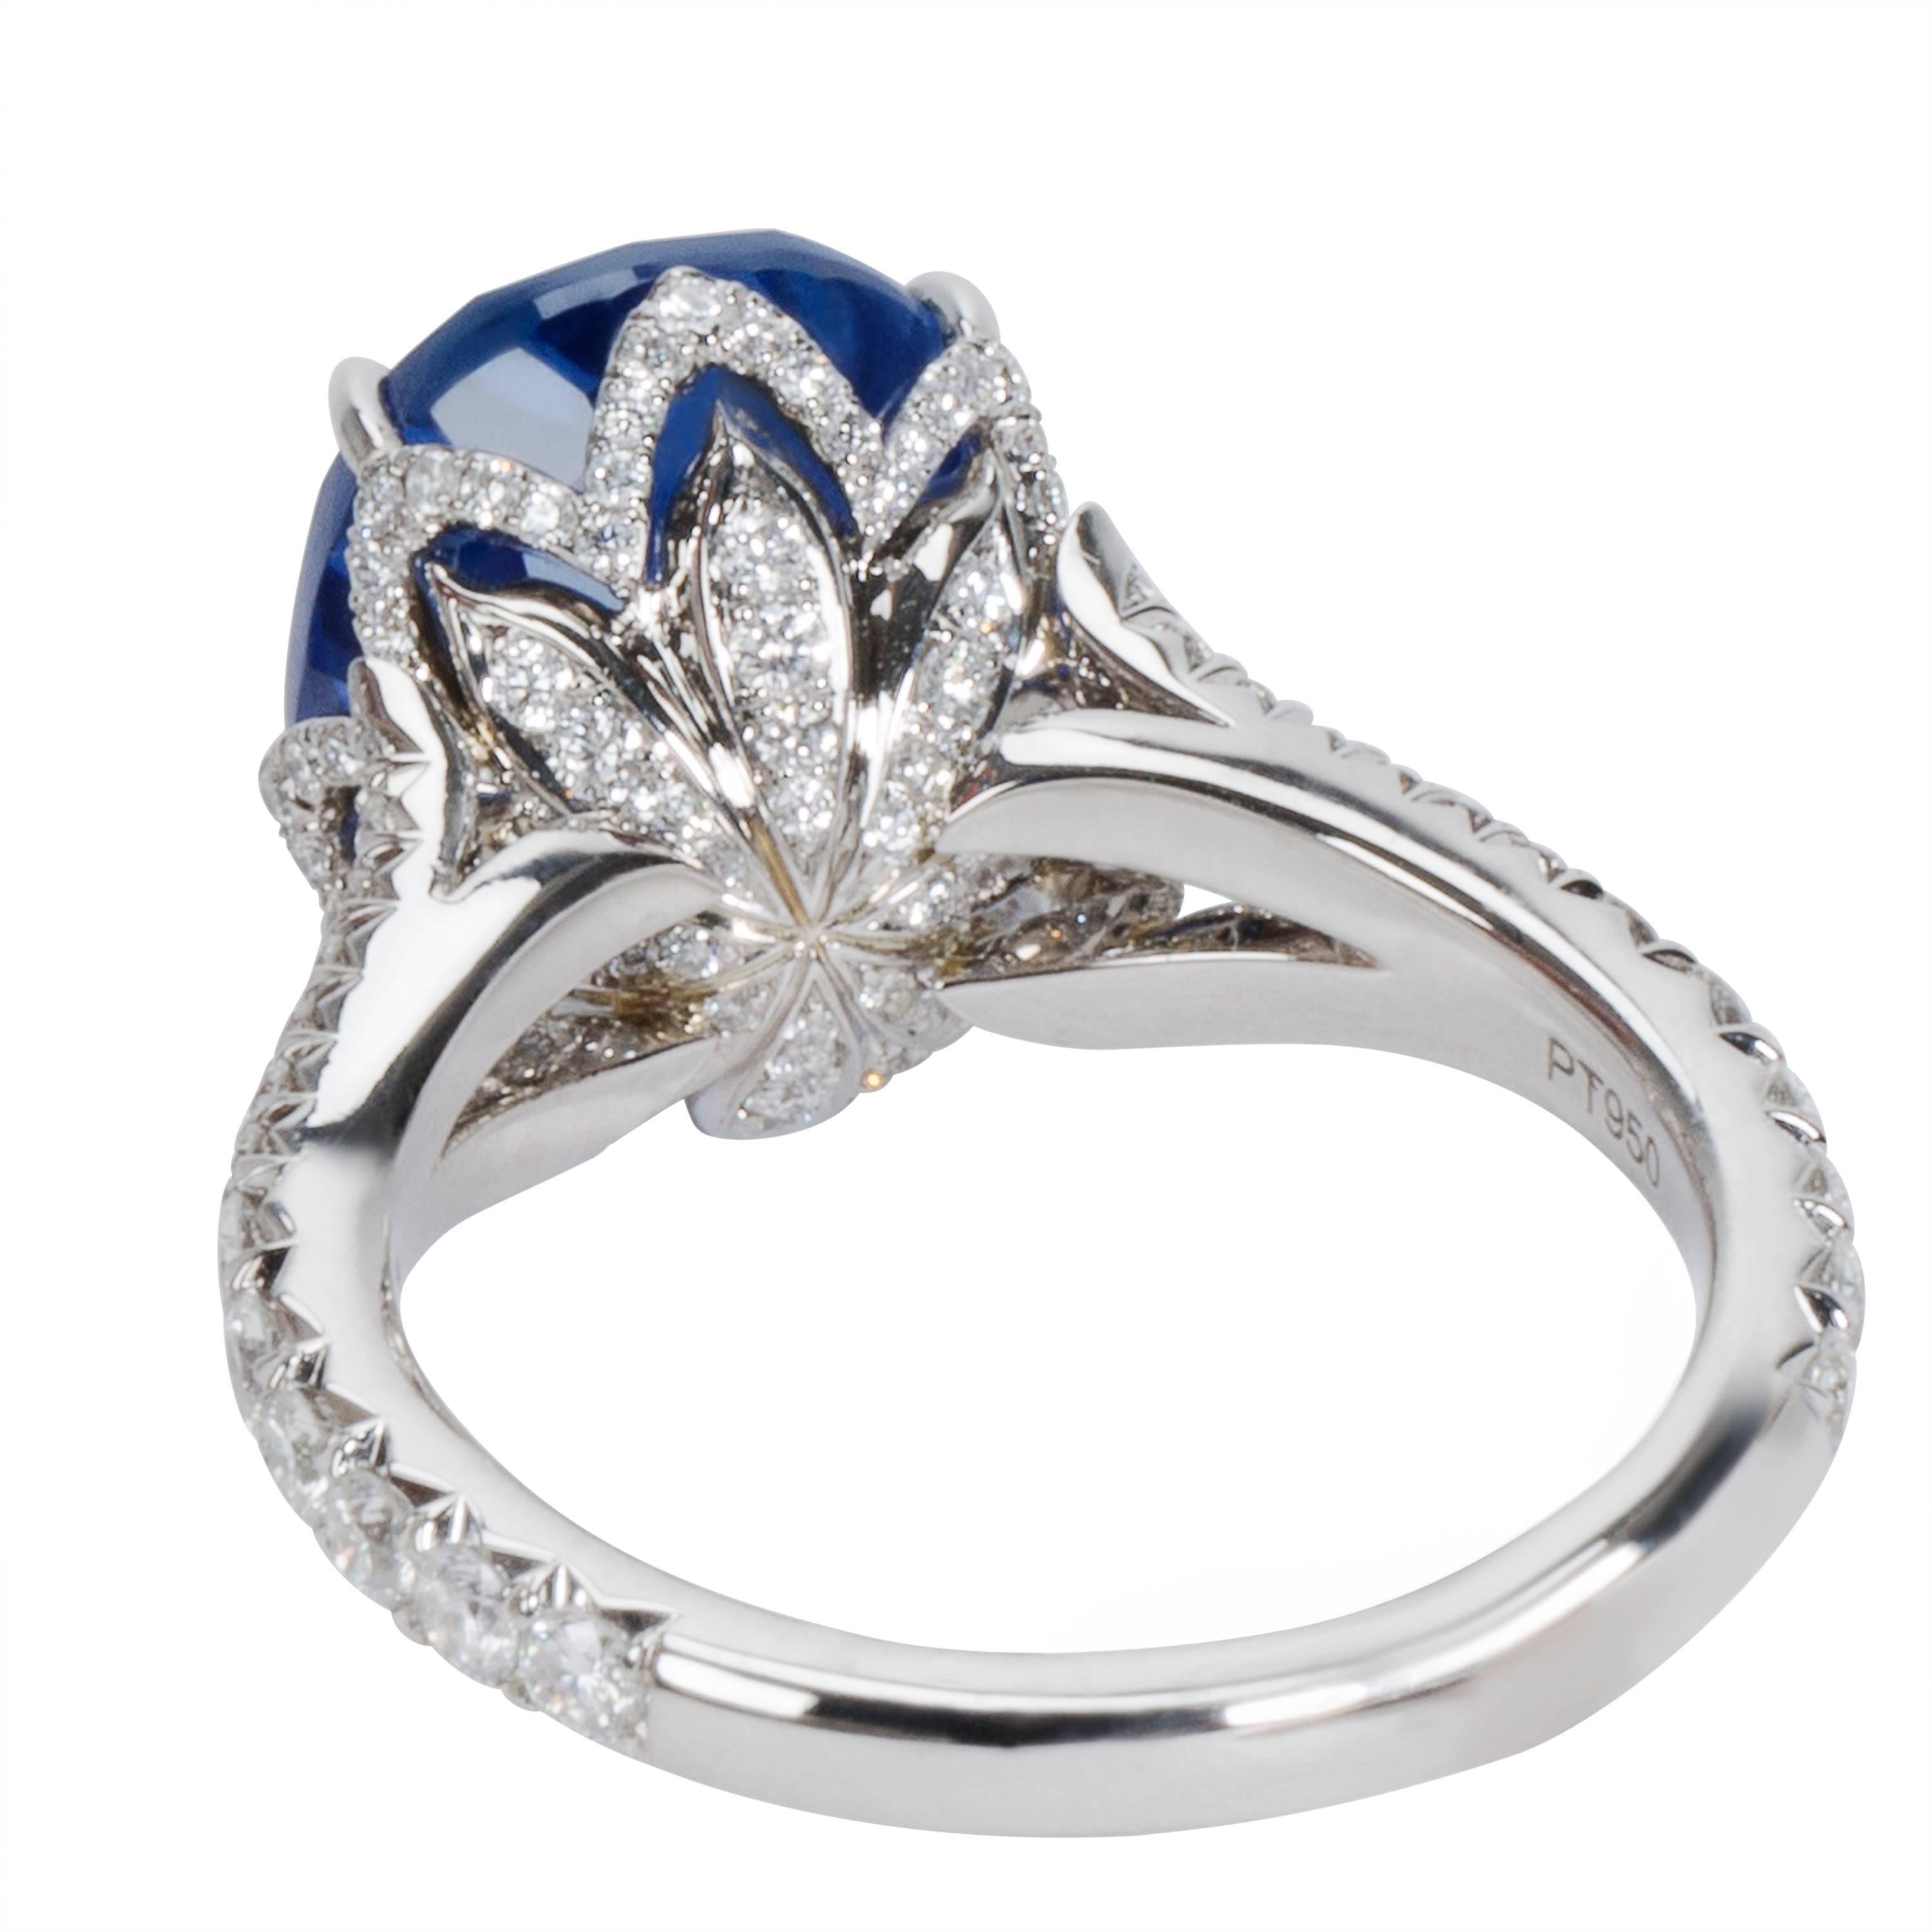 Oval Cut AGL Certified Ceylon Sapphire and Diamond Ring in Platinum (10.43 Carats)